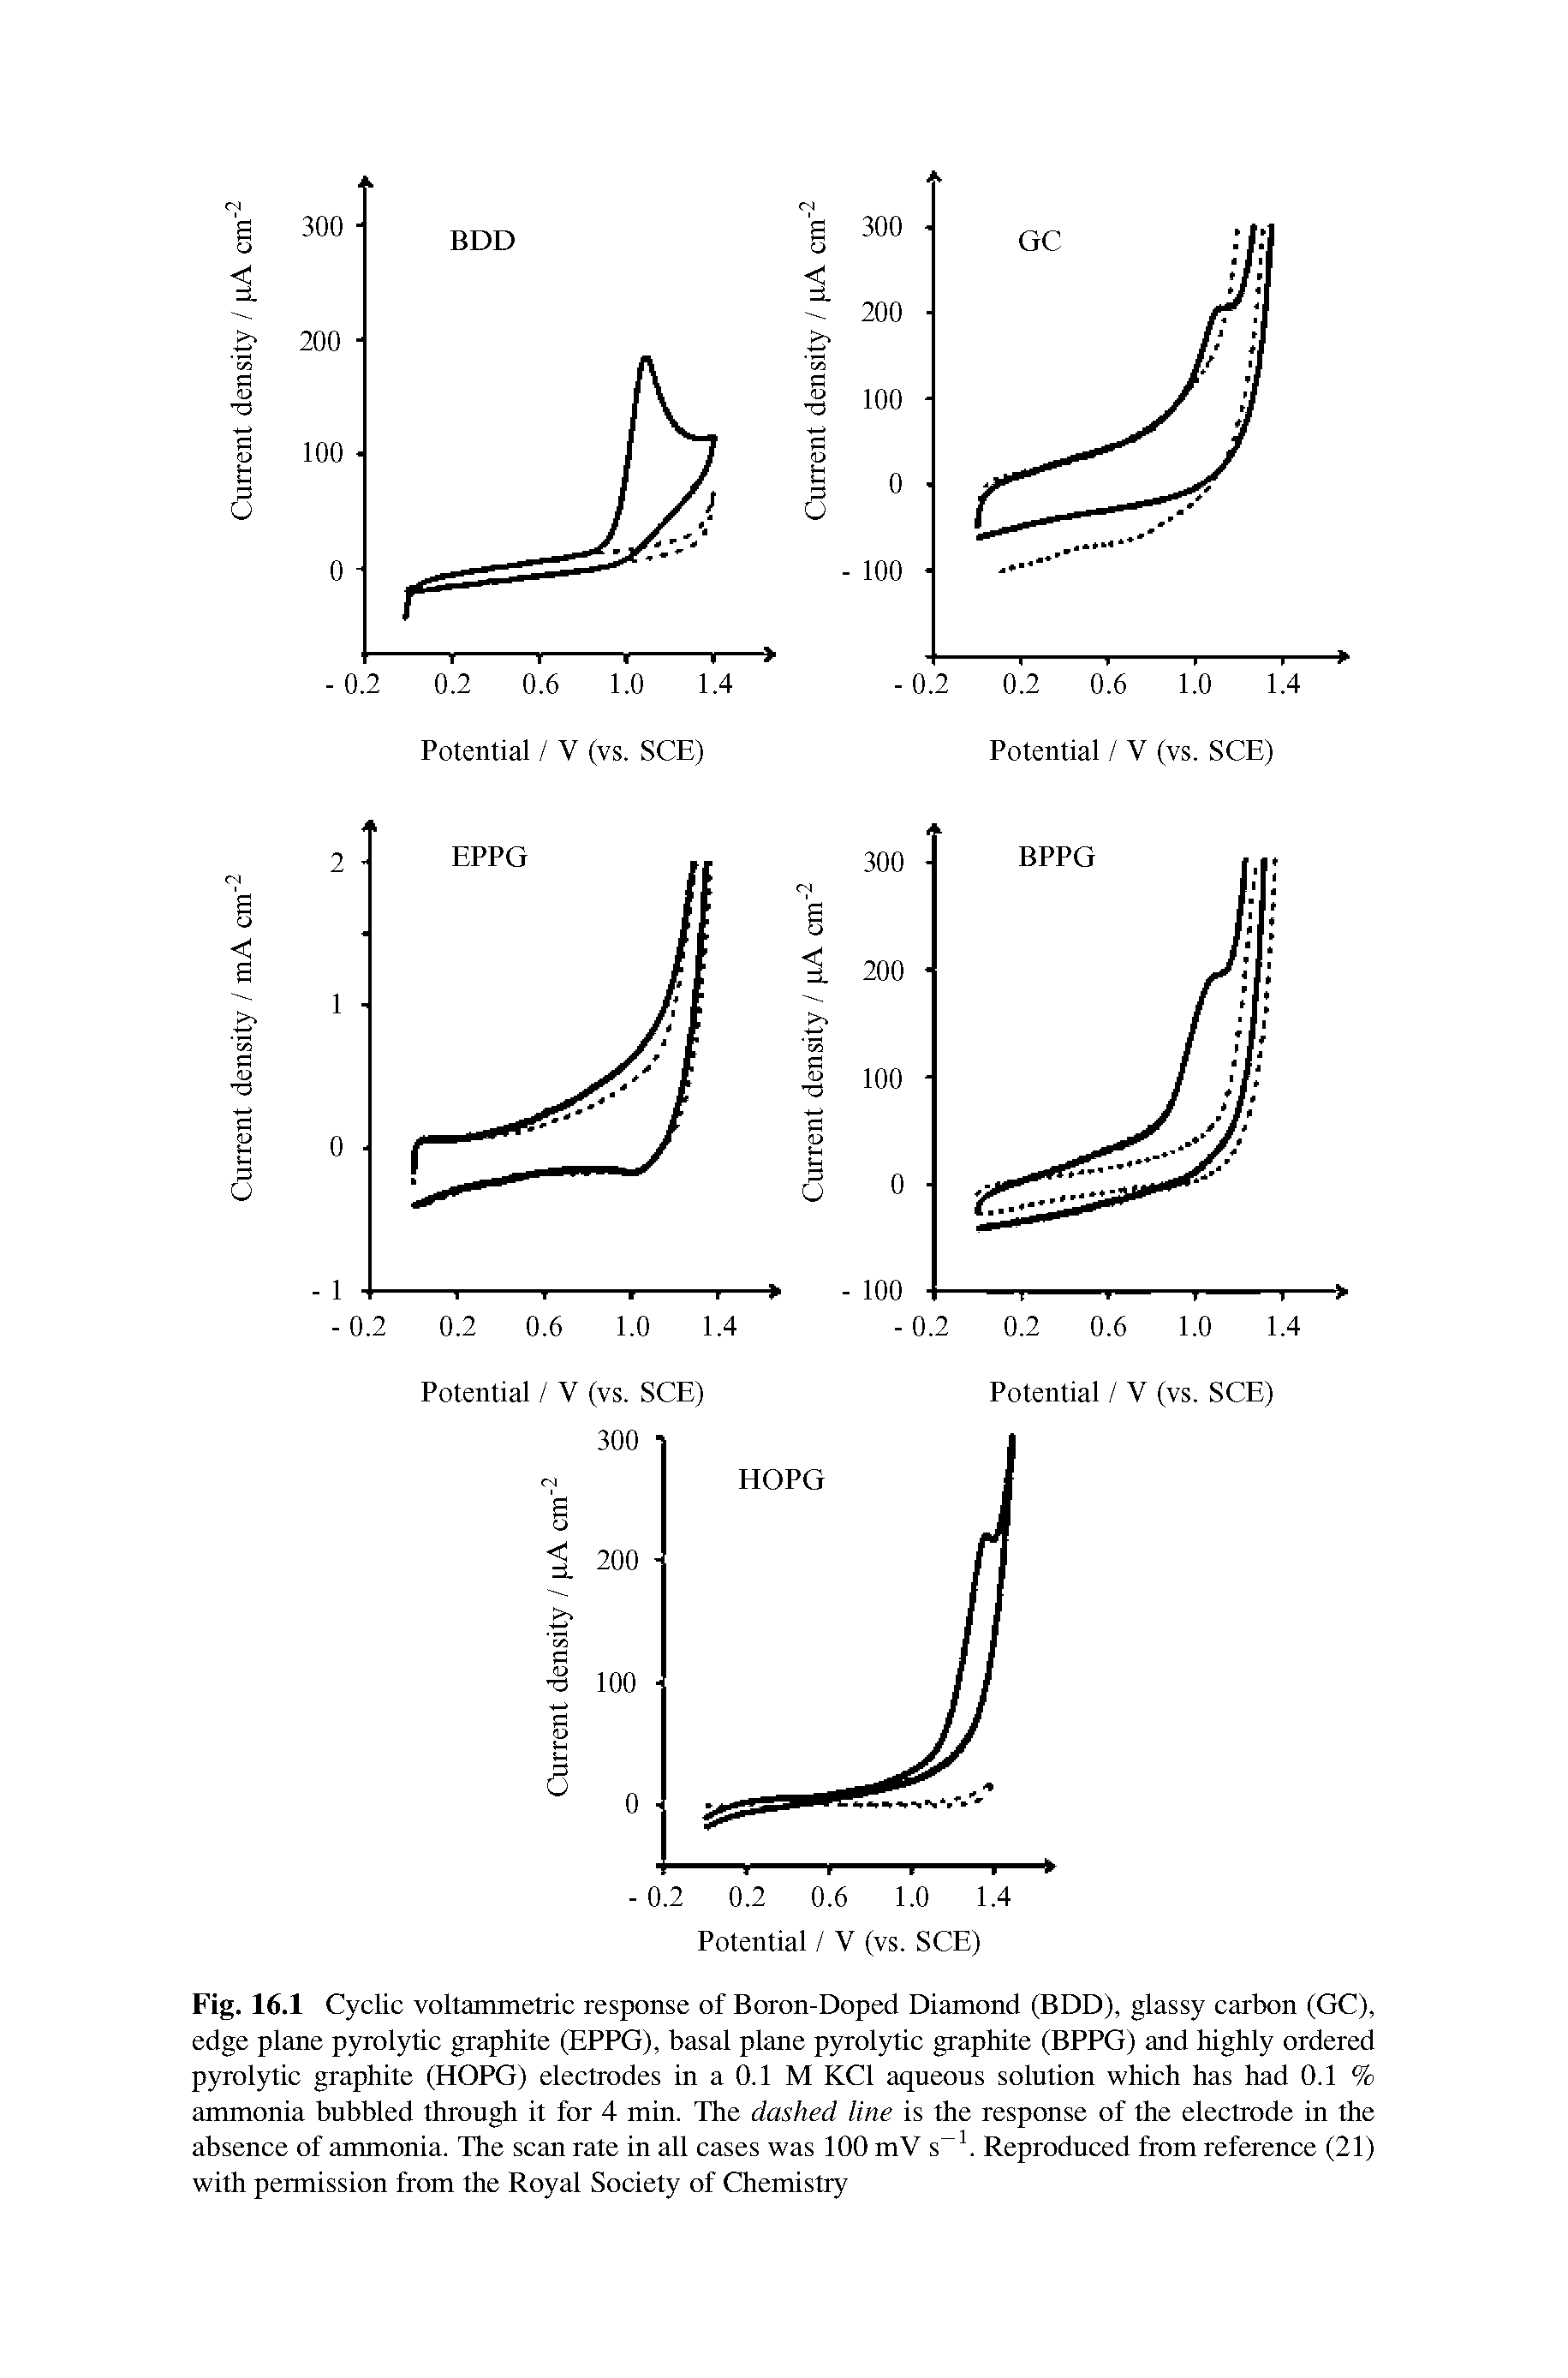 Fig. 16.1 Cyclic voltammetric response of Boron-Doped Diamond (BDD), glassy carbon (GC), edge plane pyrolytic graphite (EPPG), basal plane pyrolytic graphite (BPPG) and highly ordered pyrolytic graphite (HOPG) electrodes in a 0.1 M KCl aqueous solution which has had 0.1 % ammonia bubbled through it for 4 min. The dashed line is the response of the electrode in the...